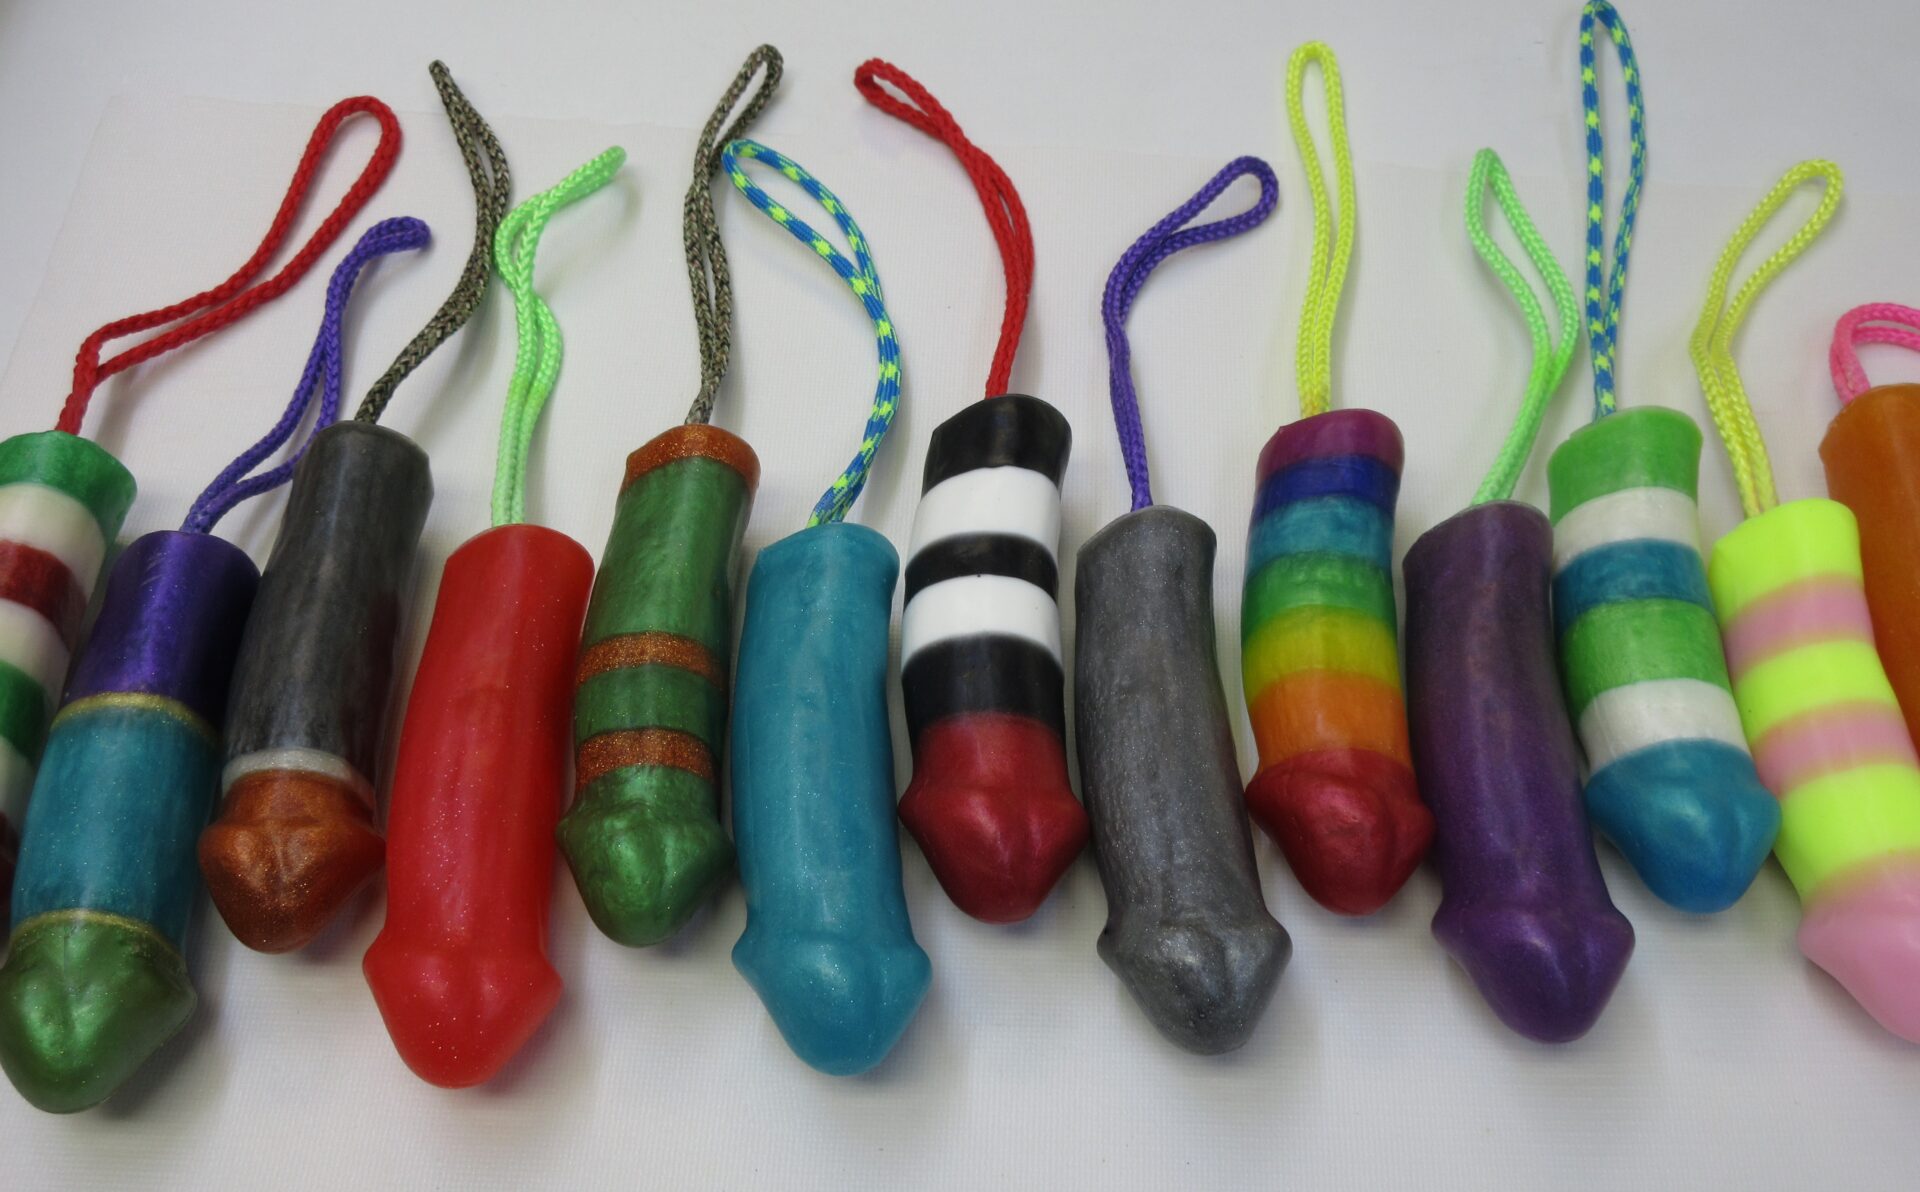 A group of different colored condoms lined up on top of each other.